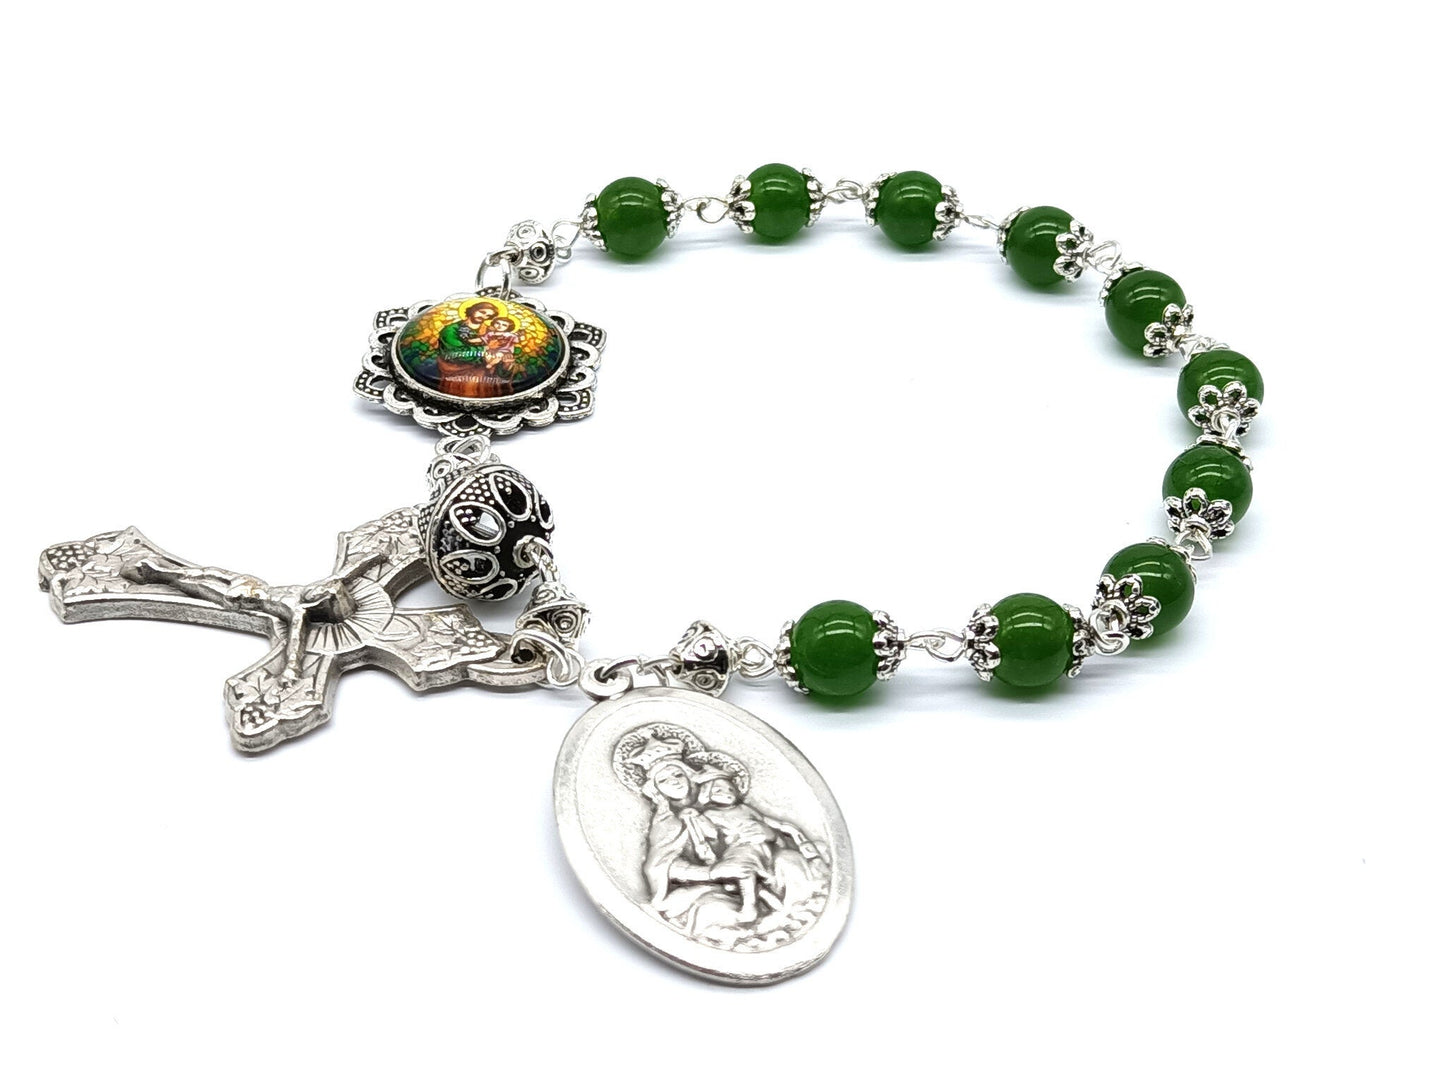 Saint Joseph unique rosary beads single decade with green gemstone beads, silver crucifix, St. Joseph picture medal and Our Lady of Mount Carmel medal.